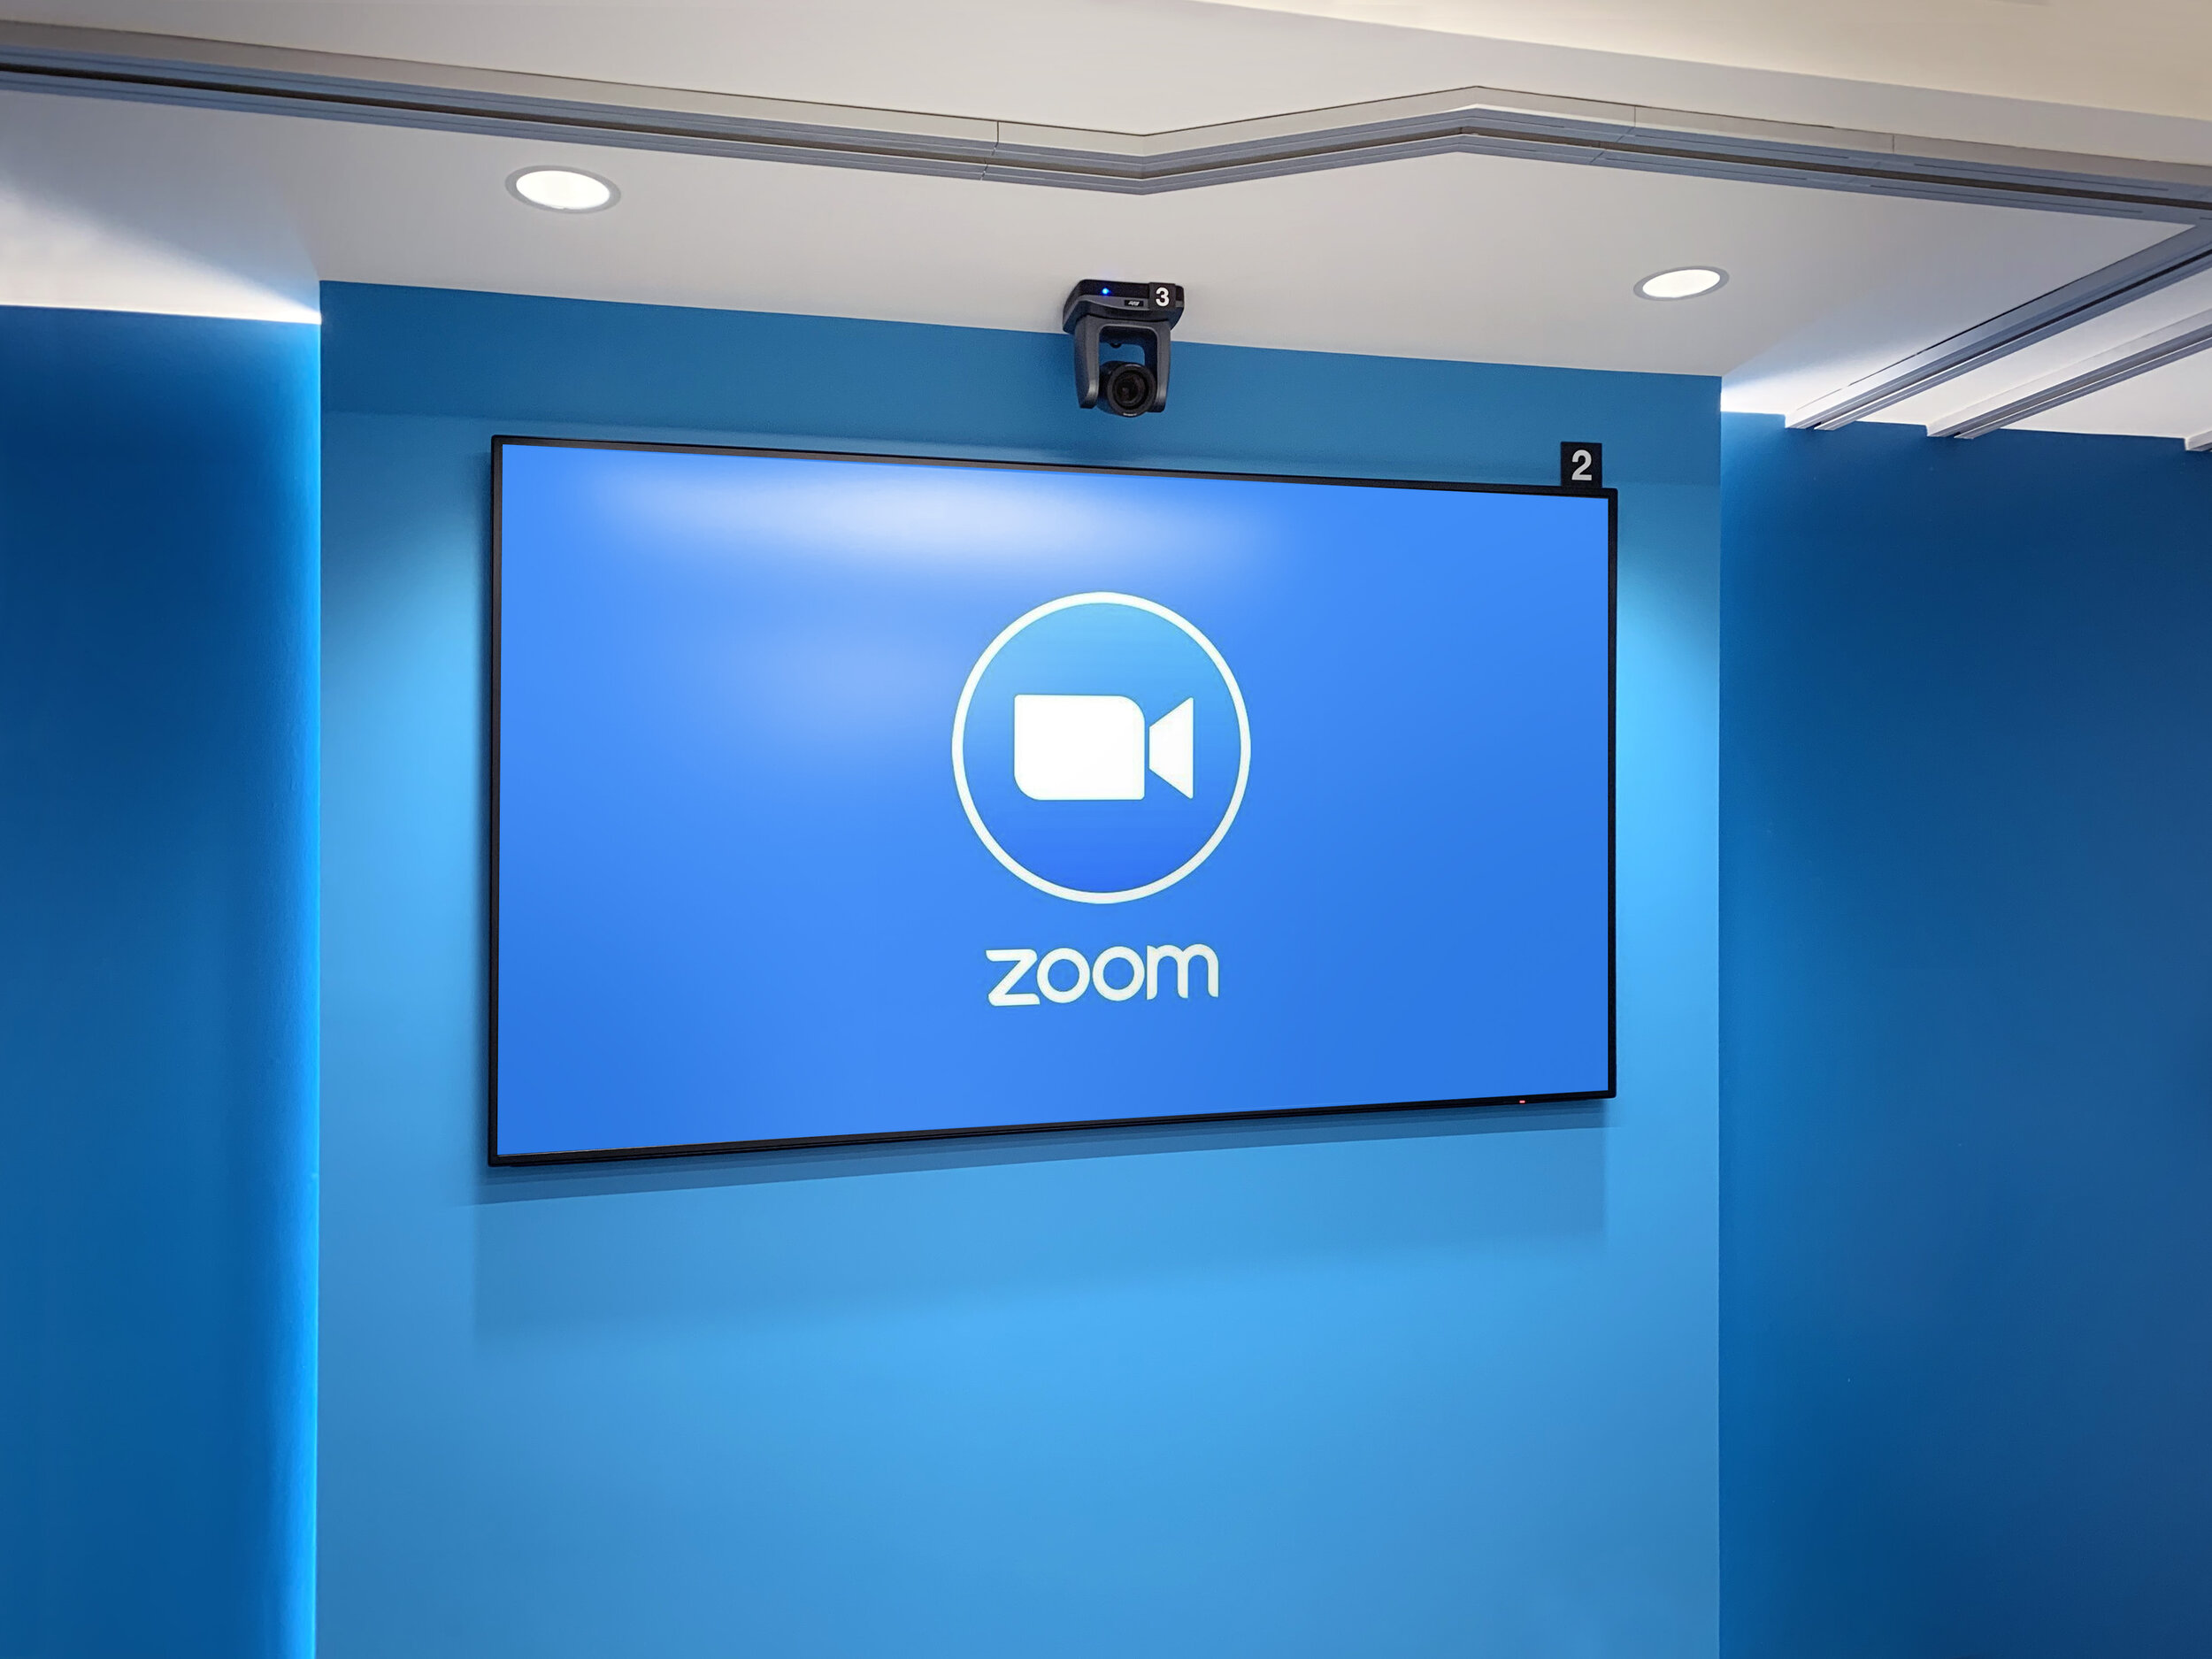  A 65-inch screen presents a Zoom splash screen, ready for a video conference to be started. The TVs are numbered to allow a guest to identify and control them via the wall-mounted touchscreen control. 